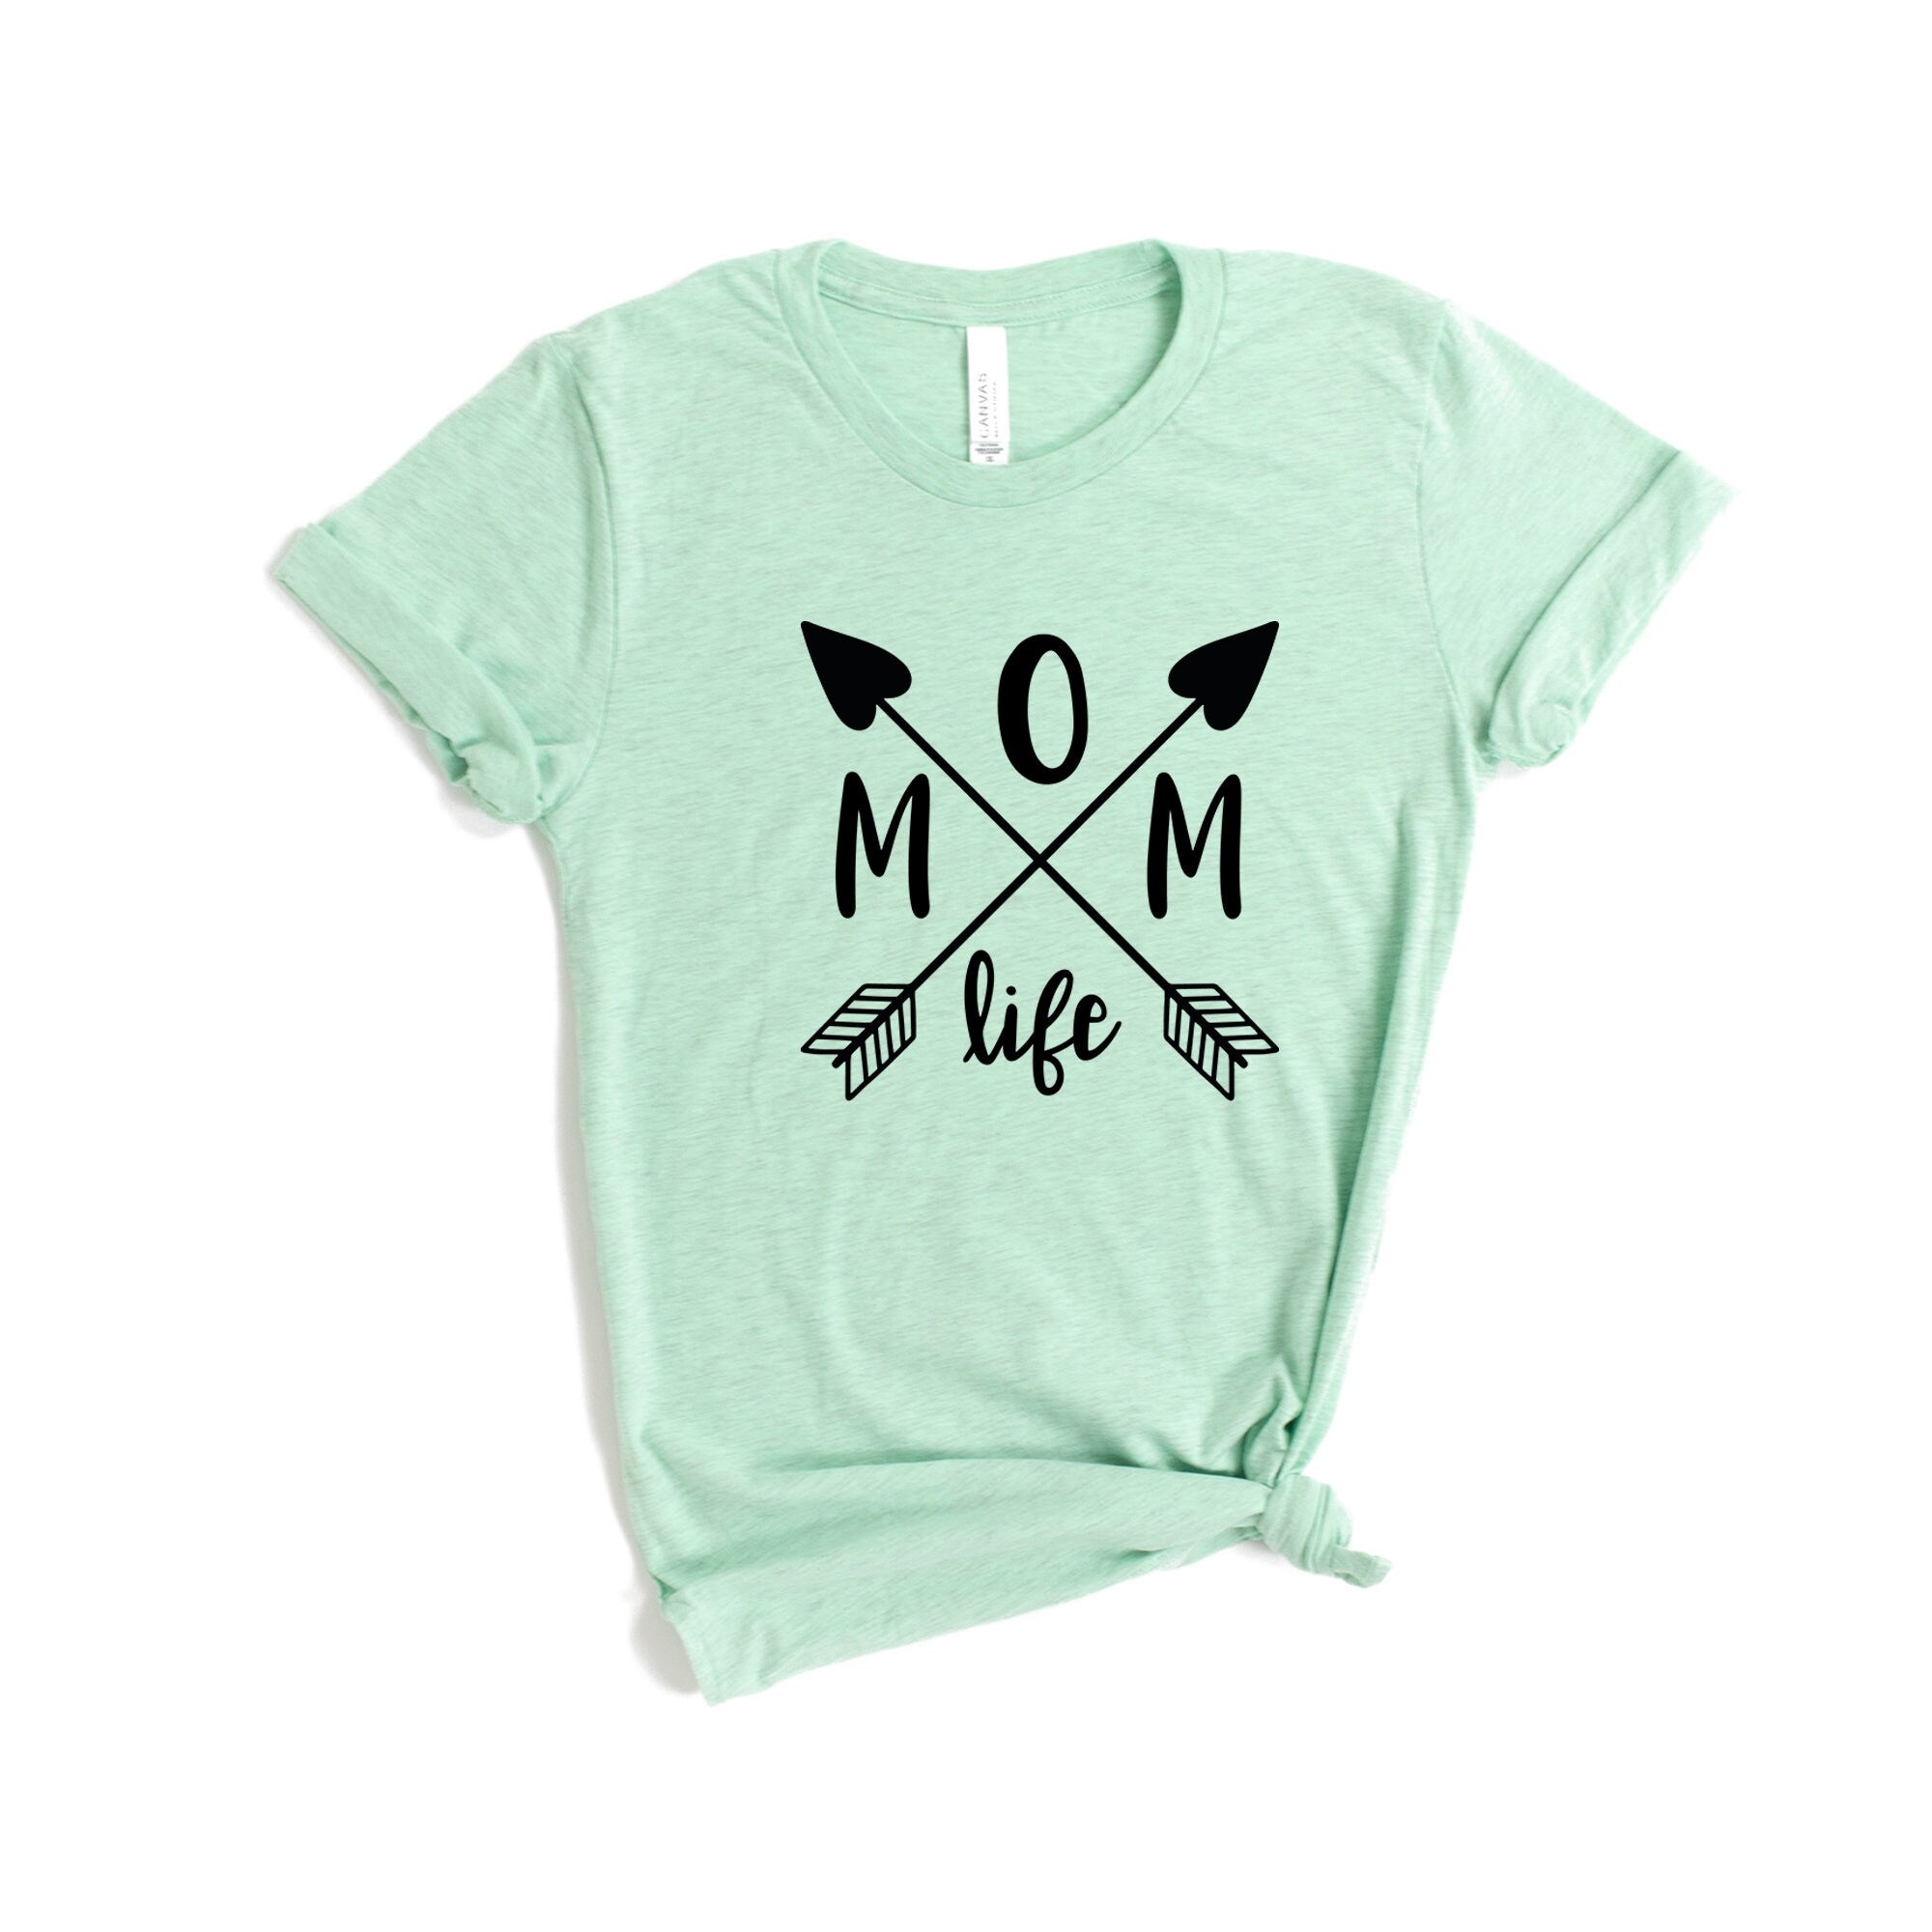 Mom Life Shirt, Mom Shirts, Mom-life Shirt, Shirts for Moms, Gift for Her, Trendy Mom T-Shirts, Cool Mom Shirts, Shirts for Moms